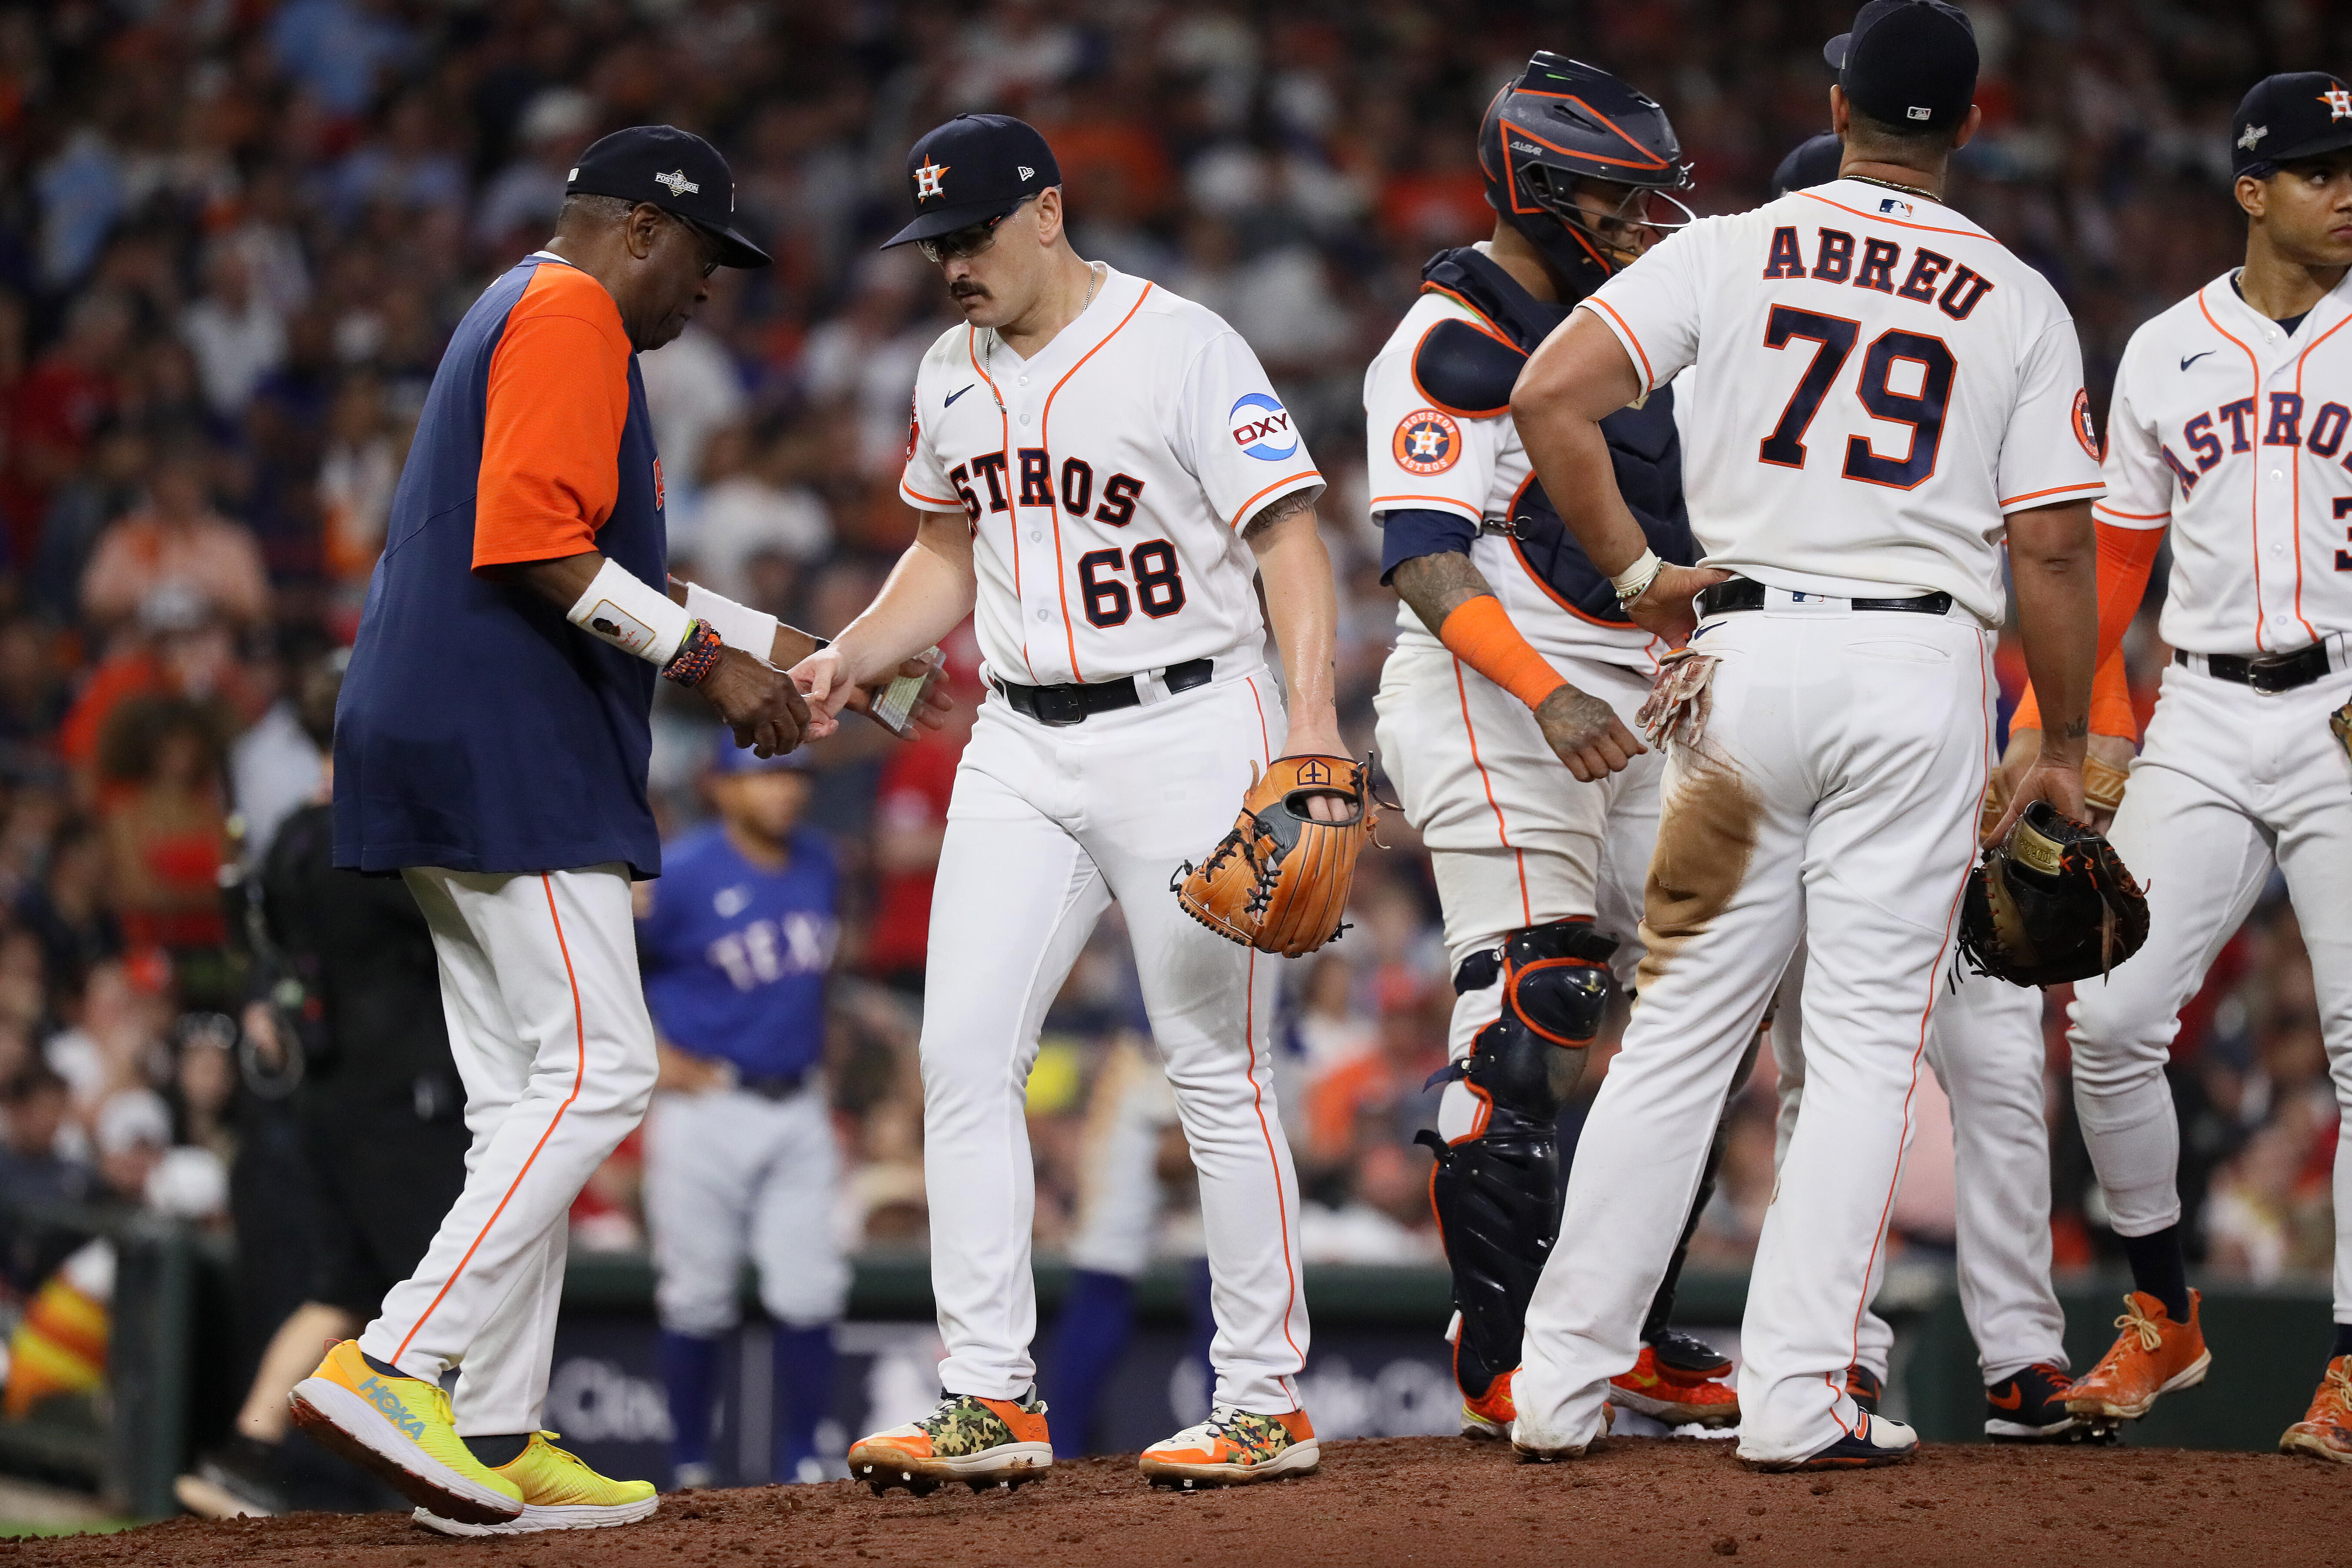 Houston Astros and buzzy brewery host official Game 3 and 4 watch